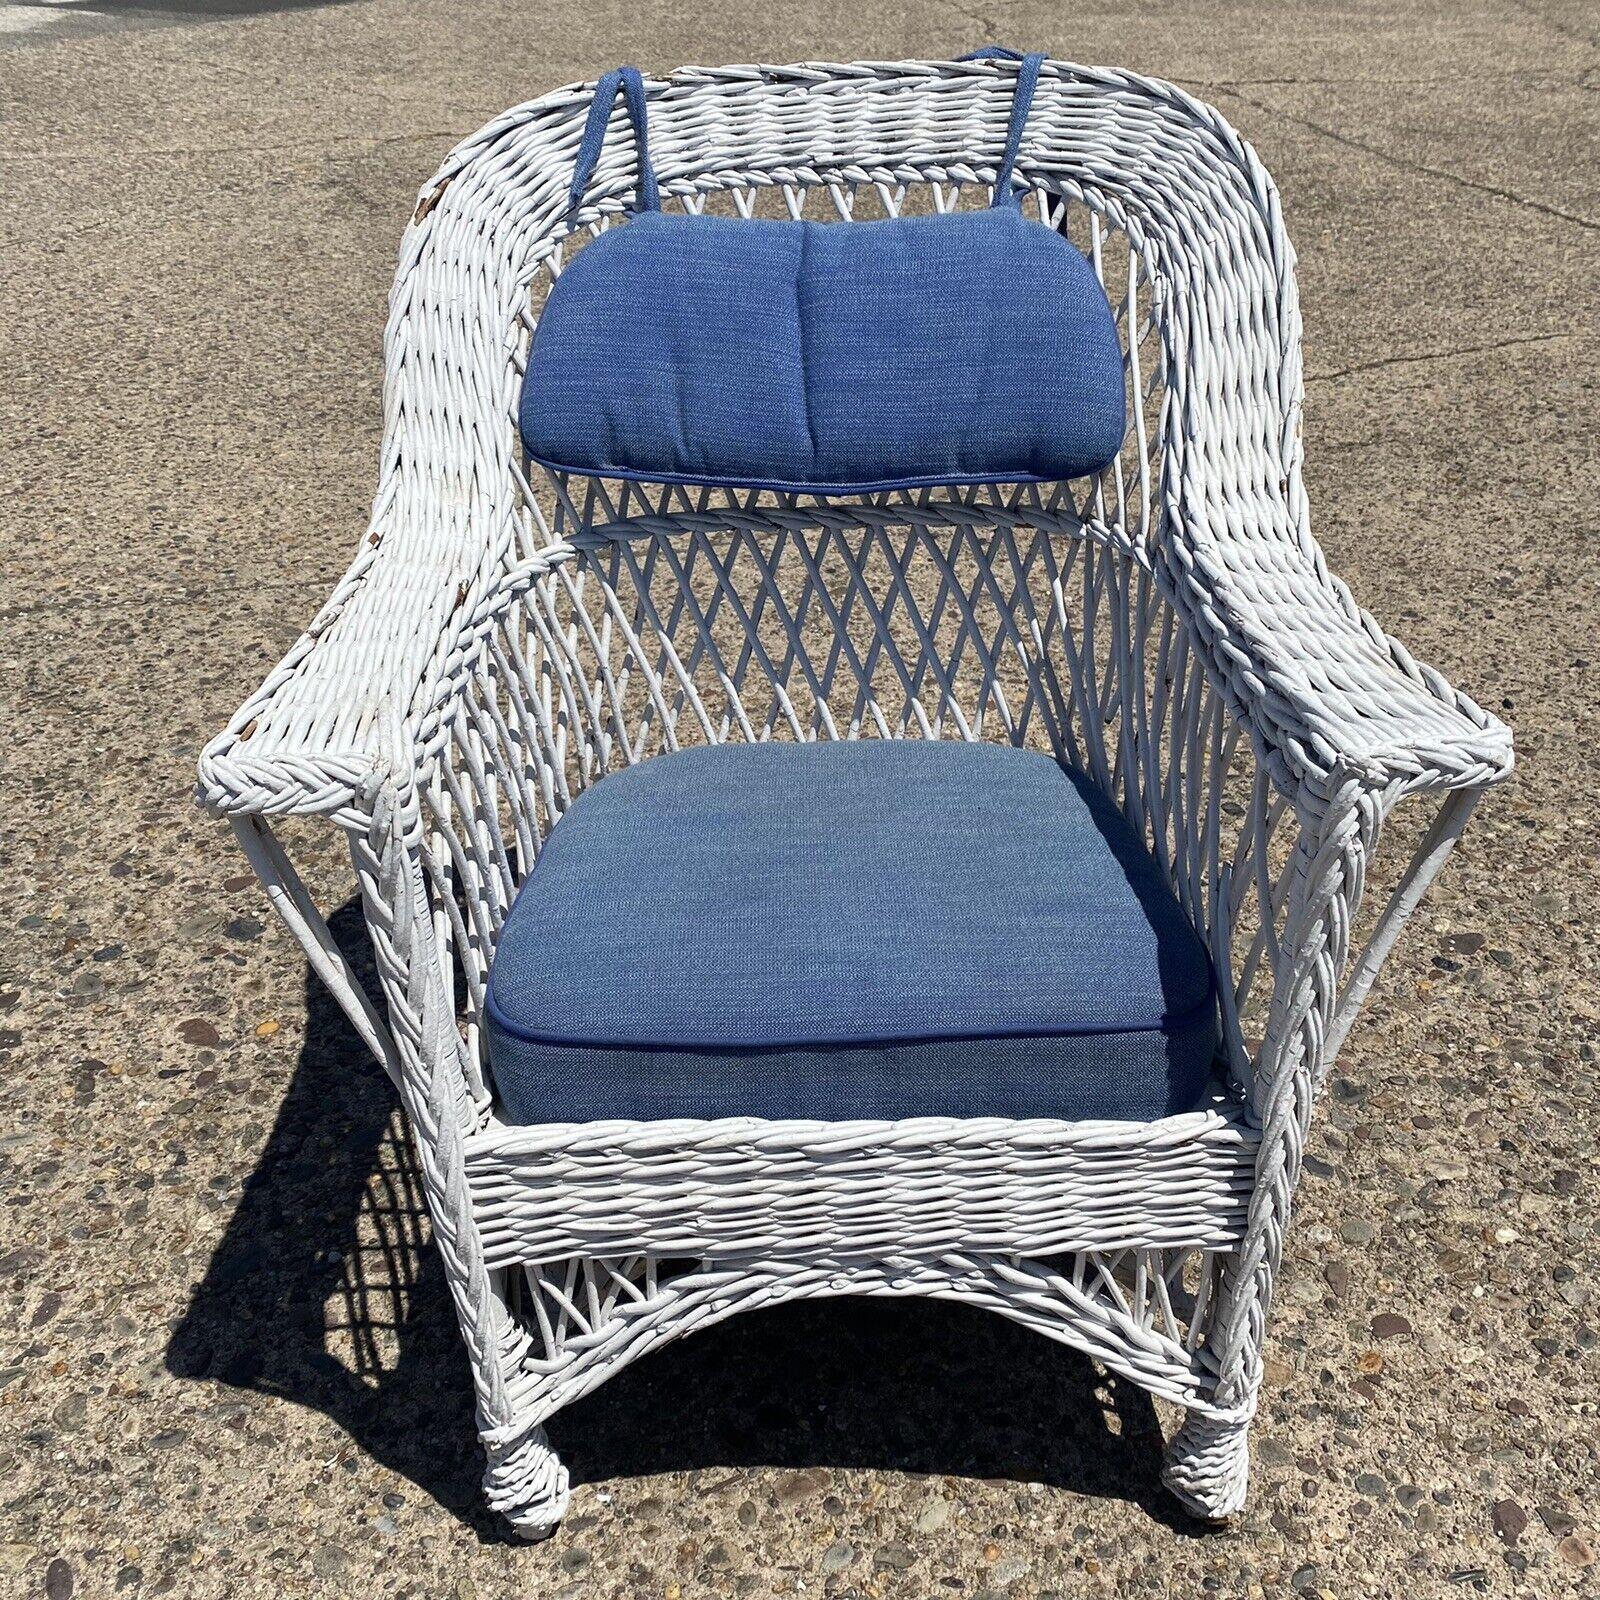 Antique American Victorian White Wicker Rattan Sunroom Lounge Arm Chair. Item features wicker wrapped wooden frame, blue cushions, very nice antique item, great style and form, very rare form. Circa early to mid 20th century. Measurements: 34.5